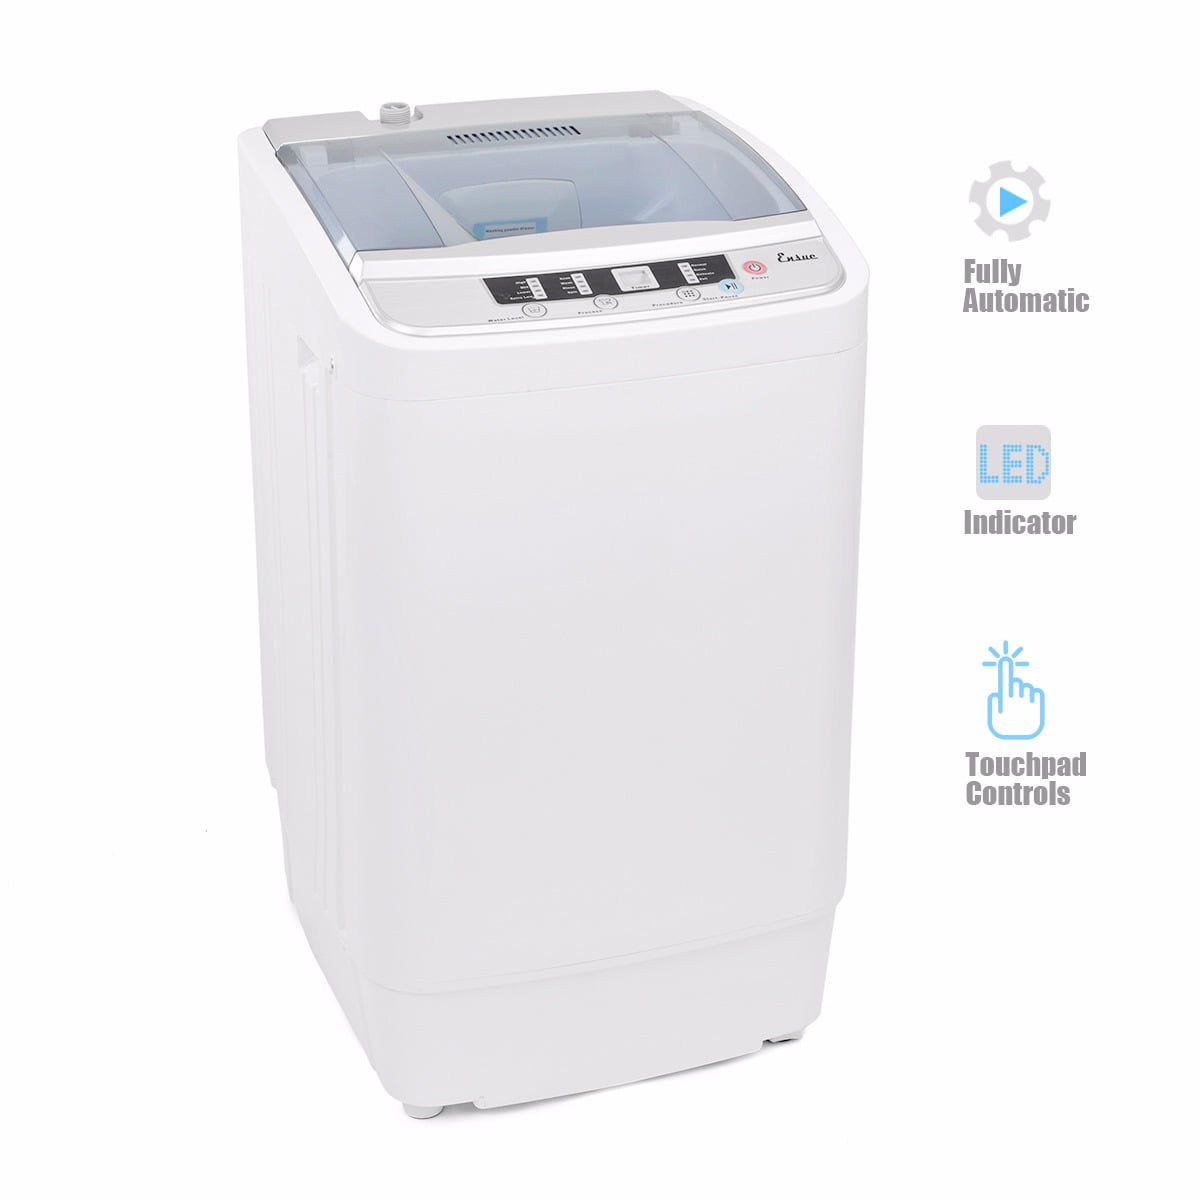 Ensue 7.7lb automatic mini washer and spinner dryer portable compact laundry combo